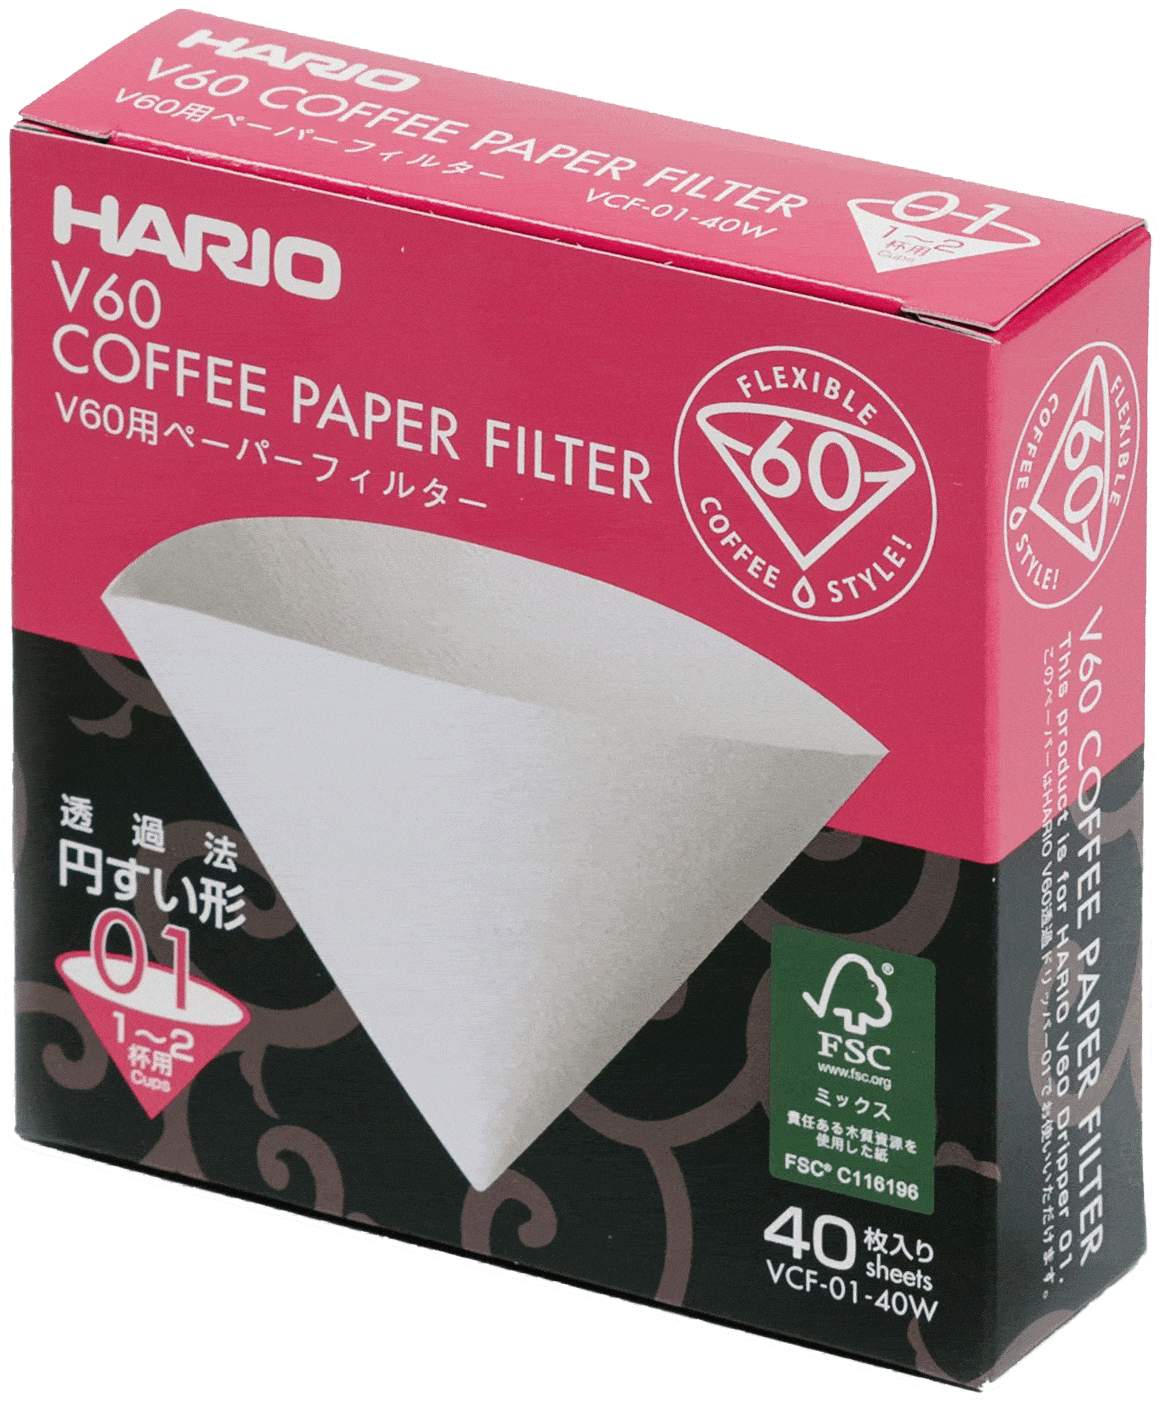 [MIS4030] Hario Filters for 01 (40 sheets)